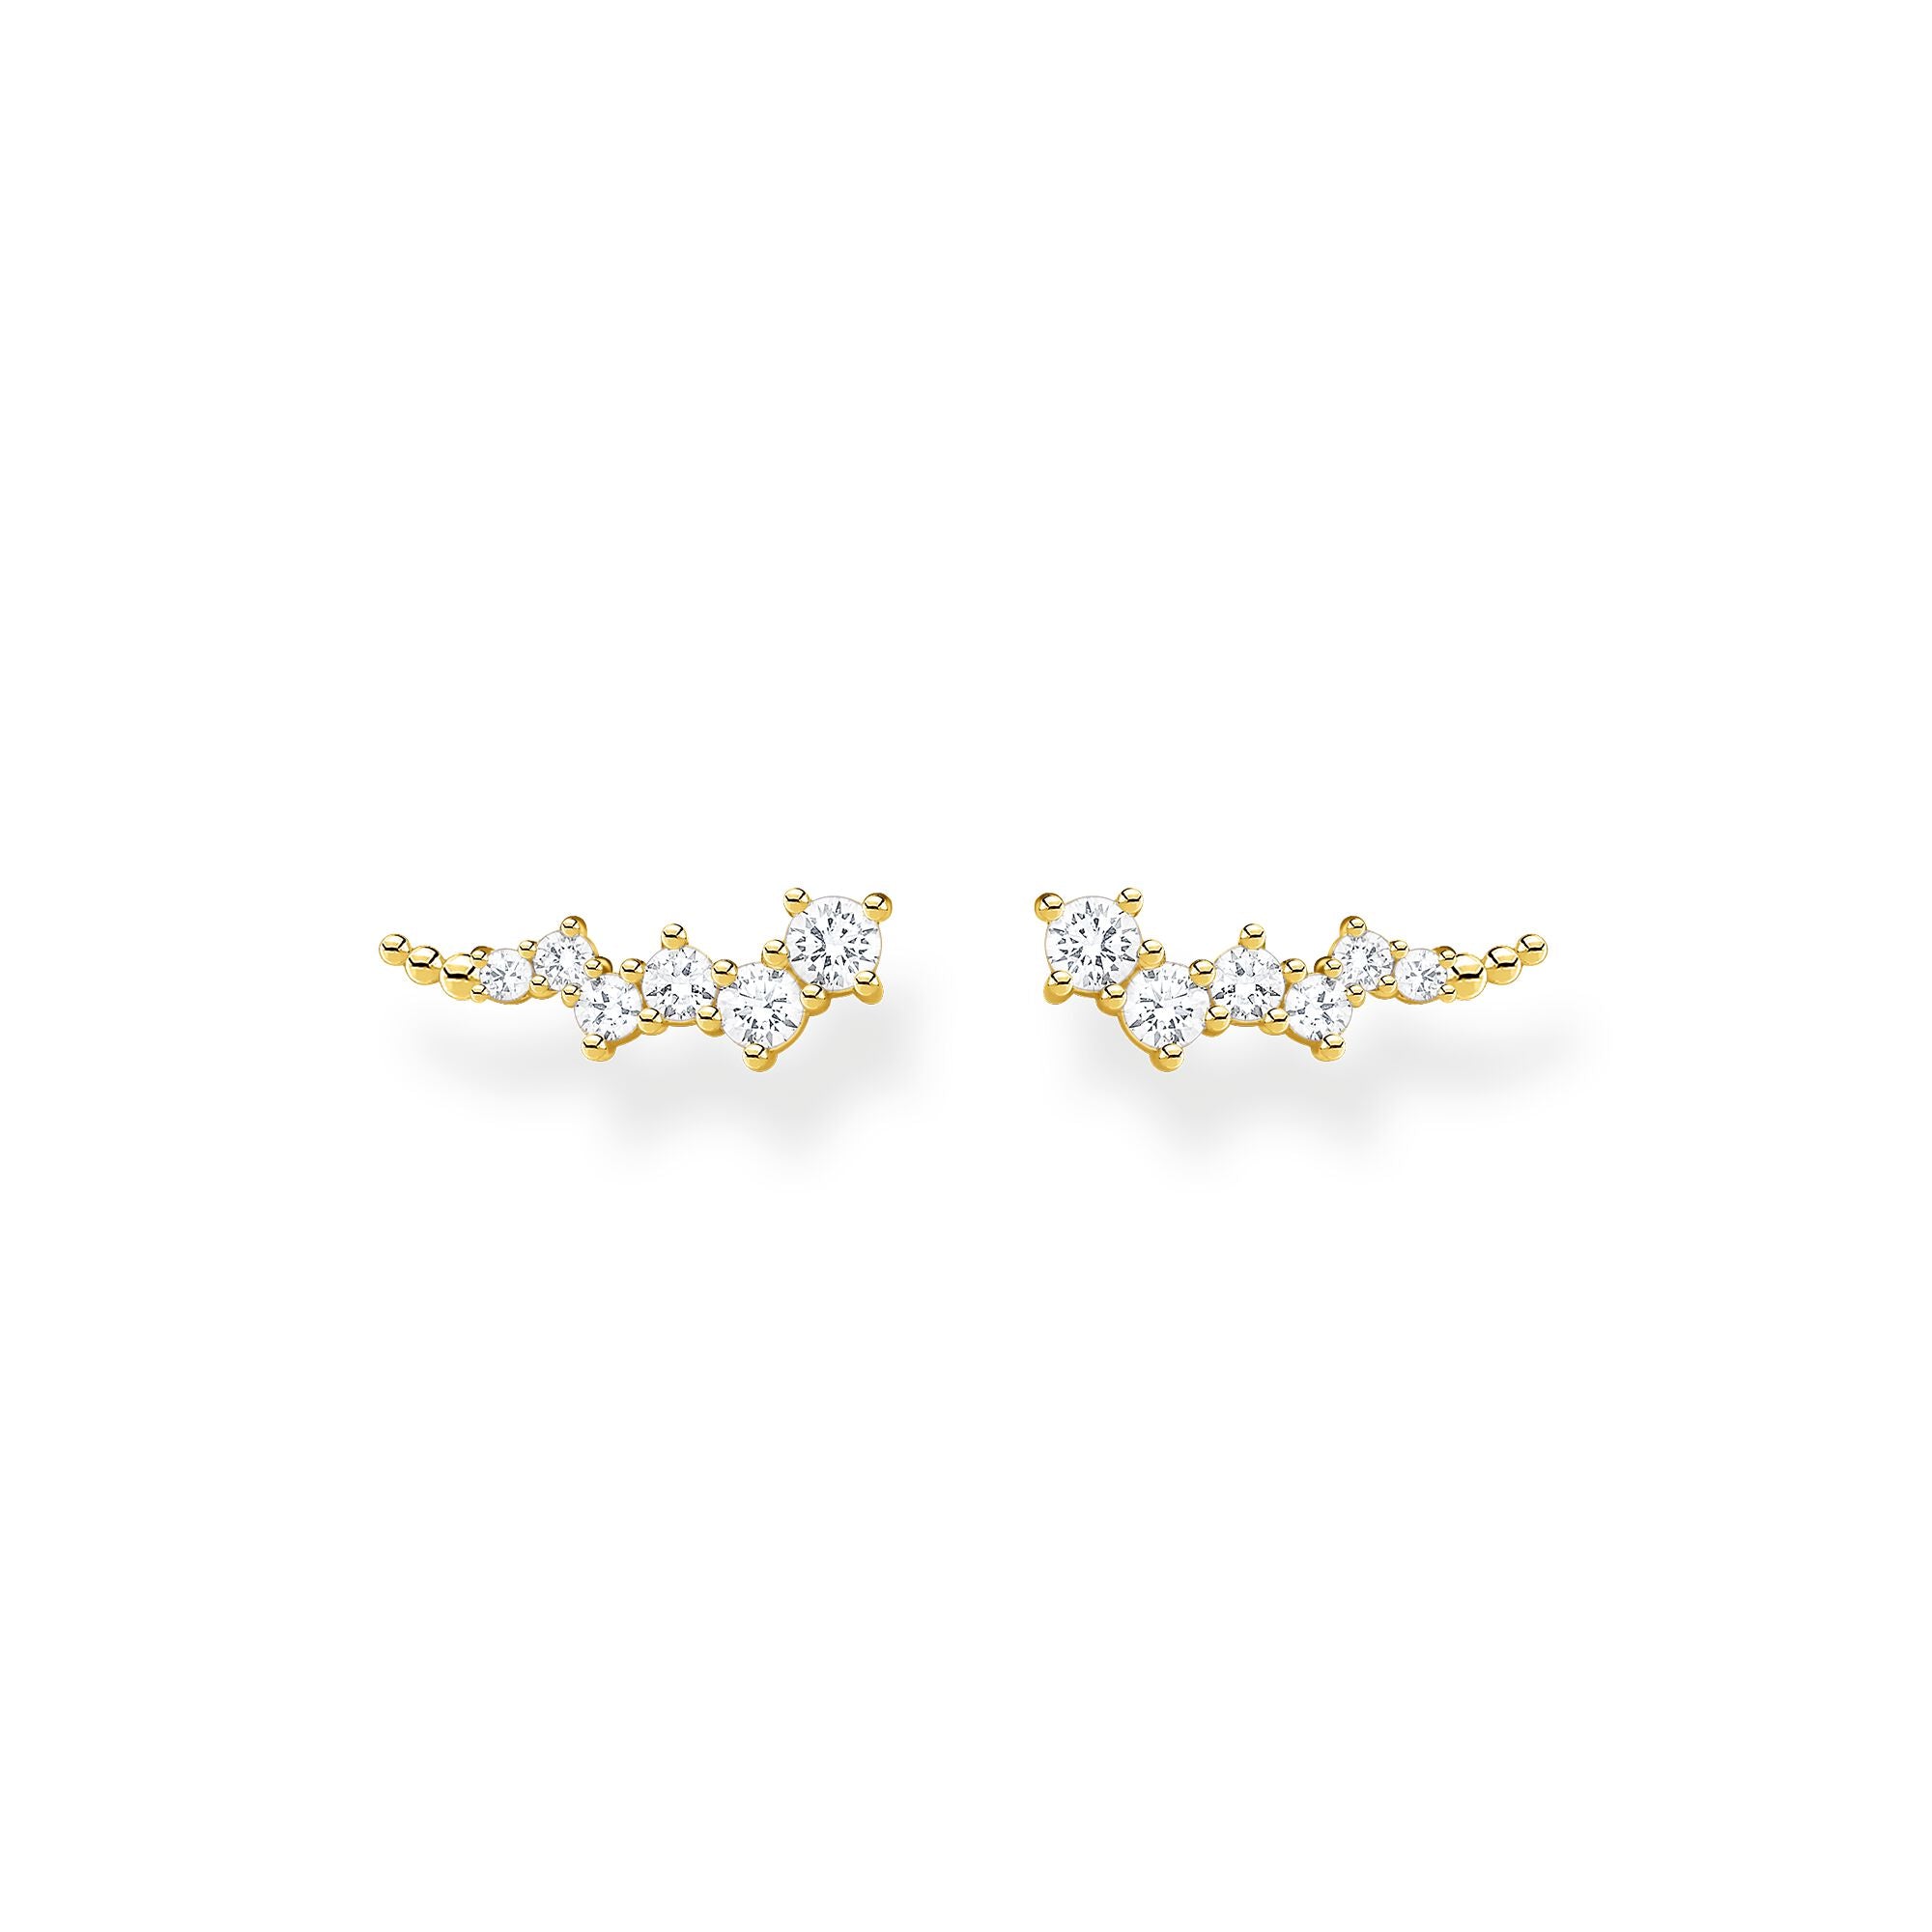 Thomas Sabo, Sterling Silver, Yellow Gold Plated, Cubic Zirconia, Multi Stone, Earring Climbers, Ottawa